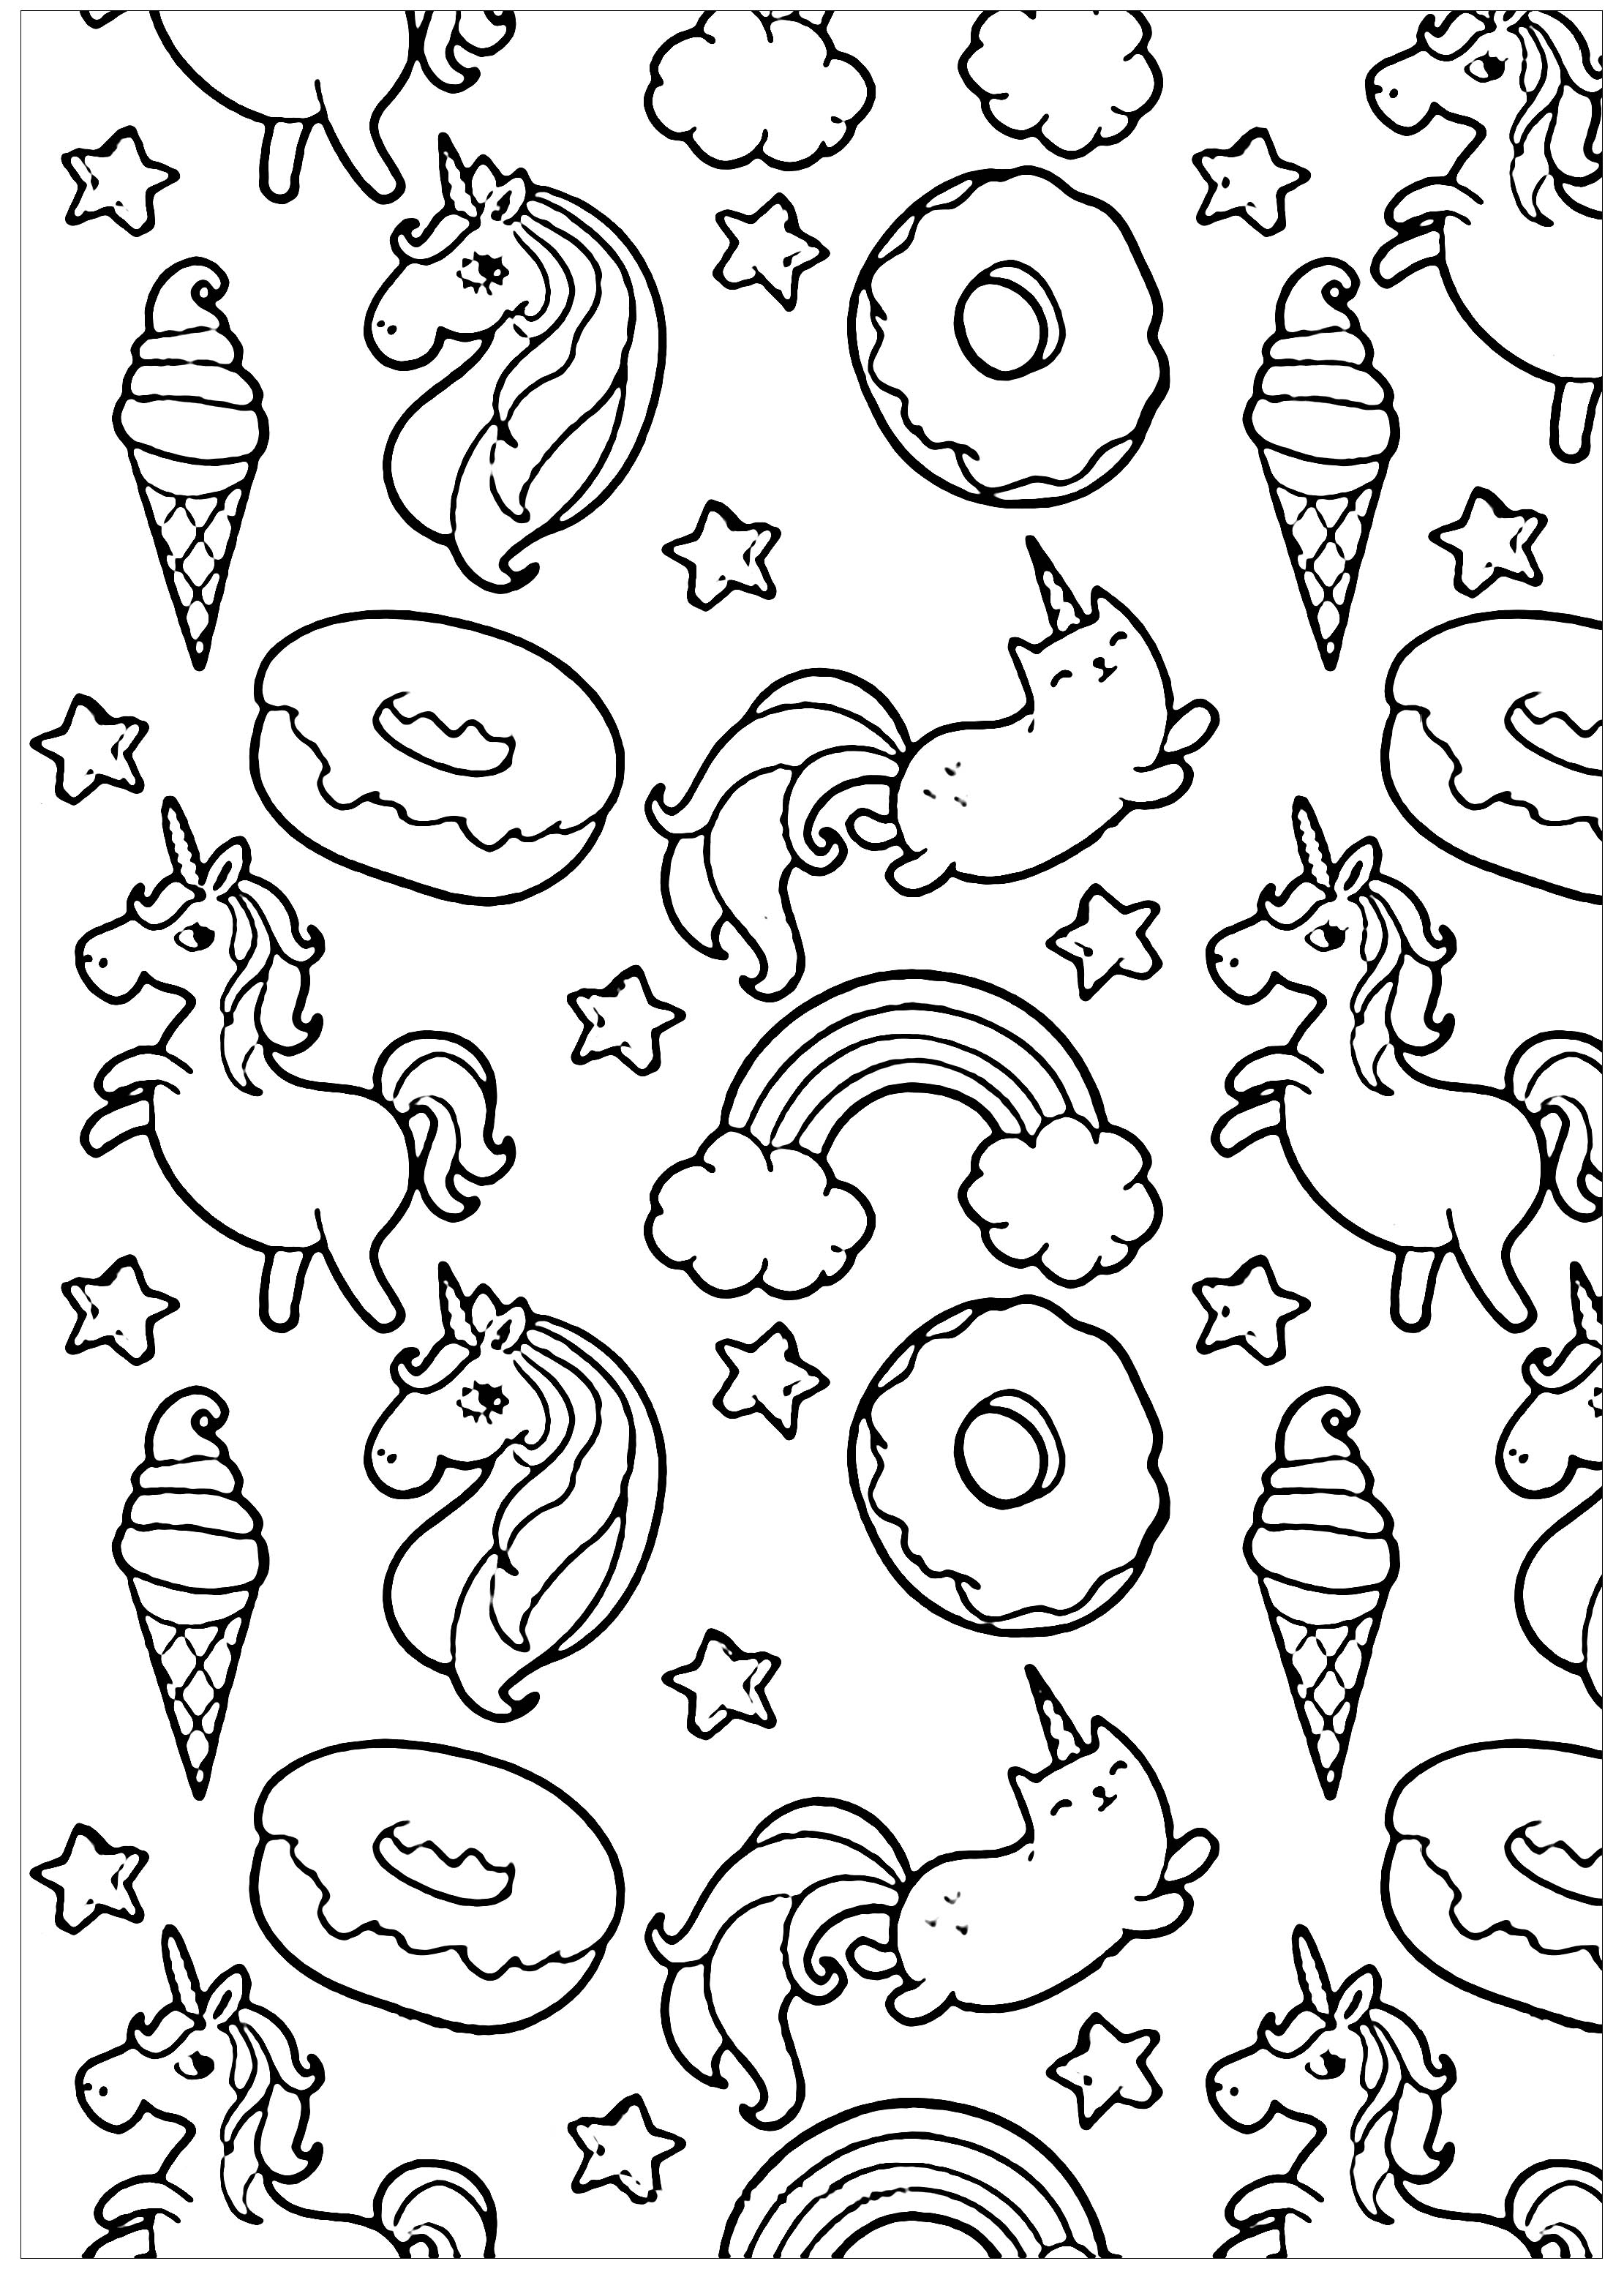 Cute free Doodle Art coloring page to download